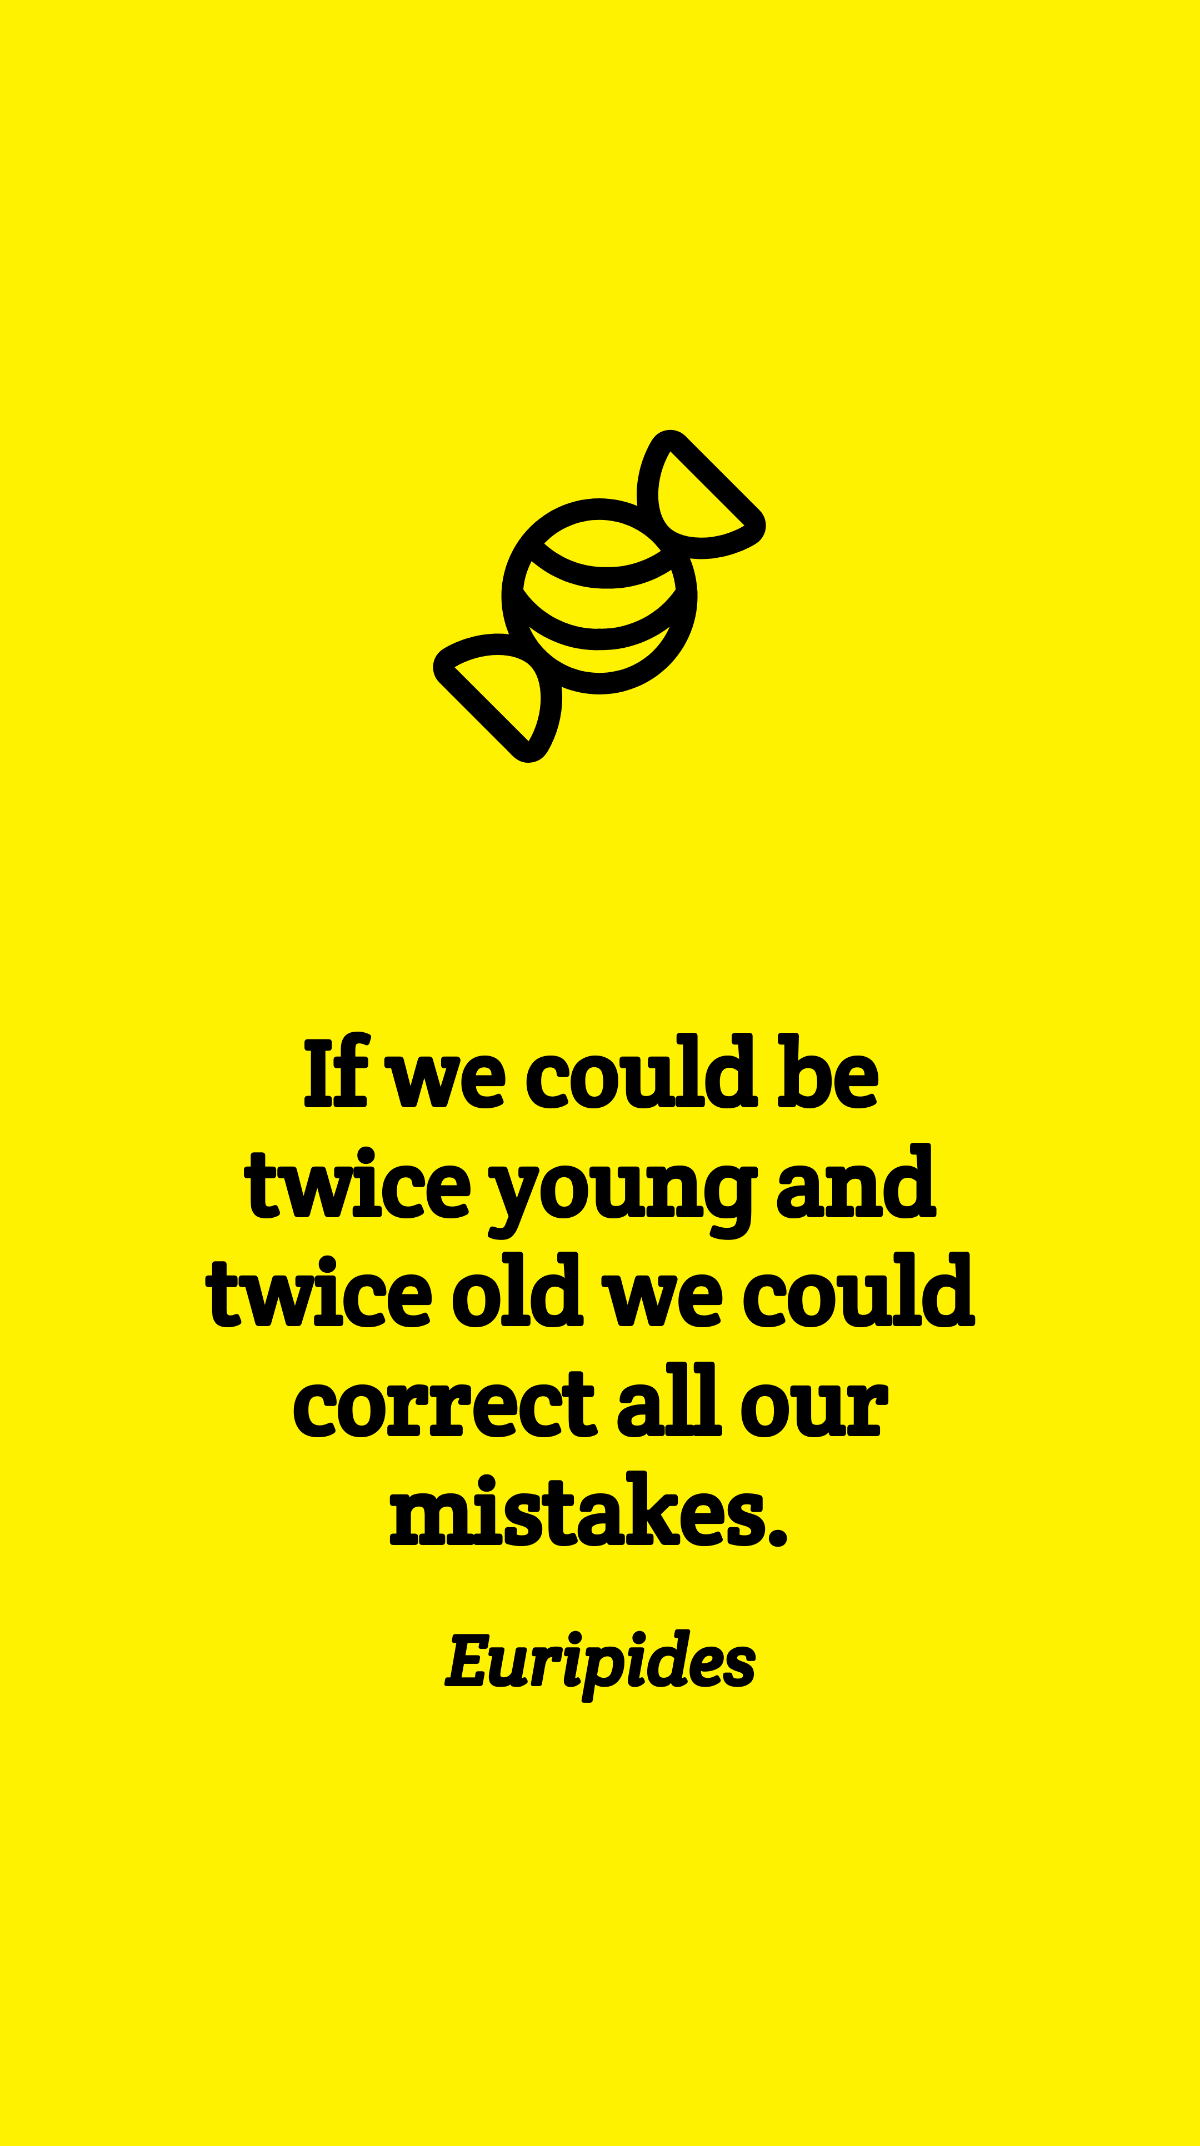 Euripides - If we could be twice young and twice old we could correct all our mistakes. Template